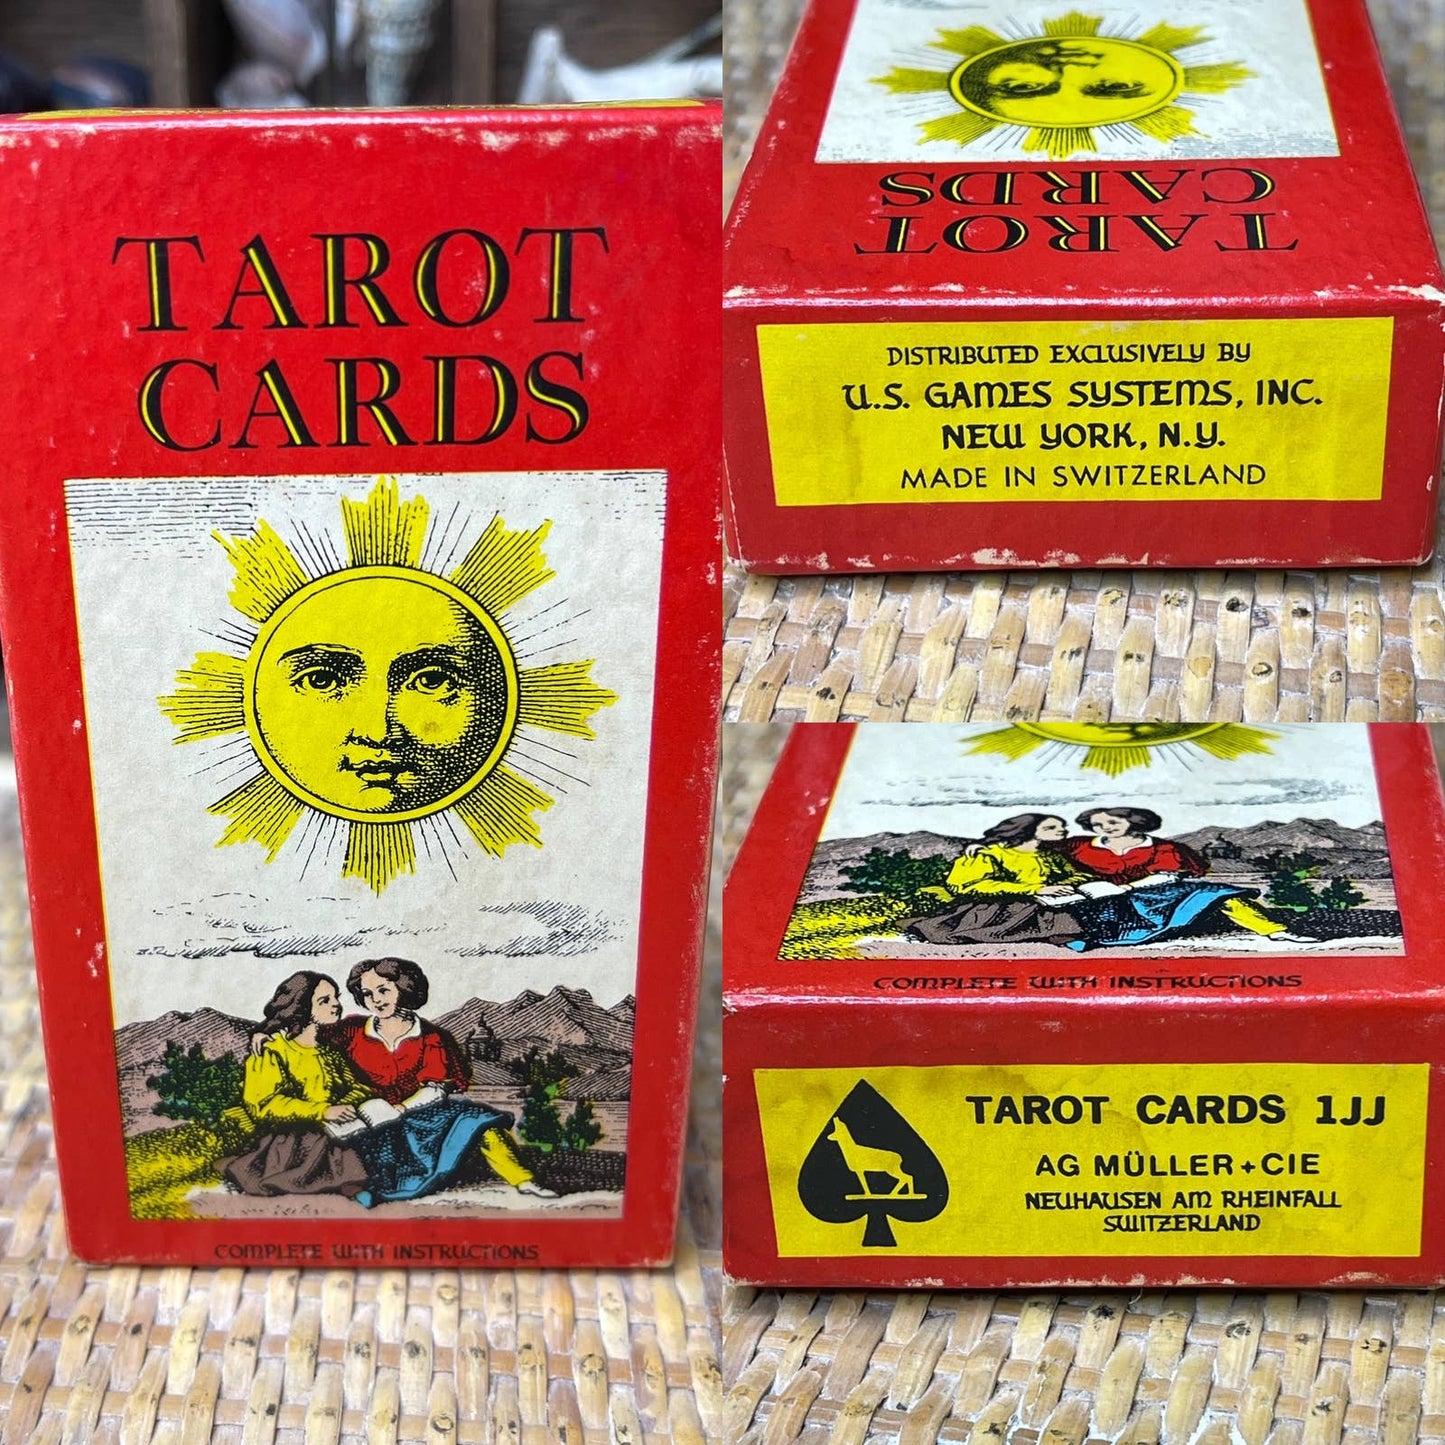 Vintage 70s Tarot Fortune Telling Game Set Deck Illustrated by S.R. Kaplan